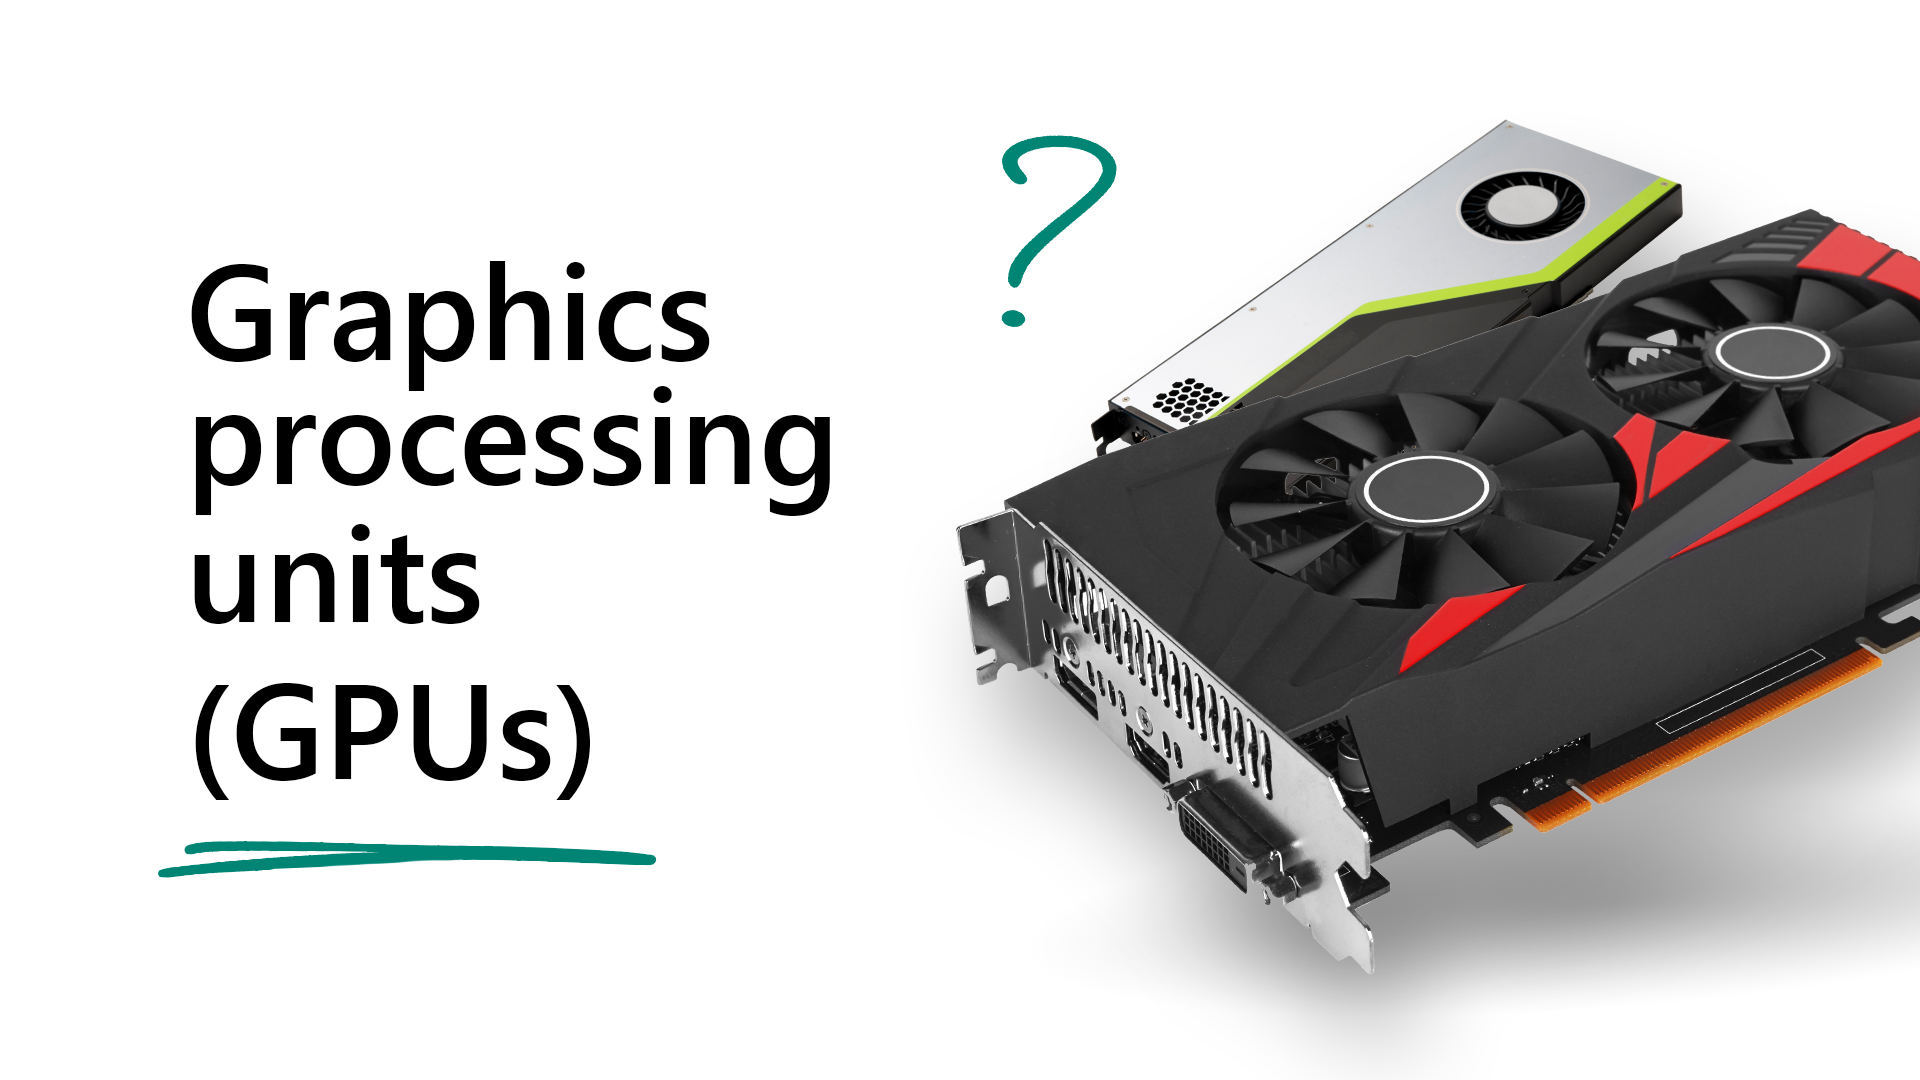 What Is a Video Card? - Function, Definition & Types - Lesson